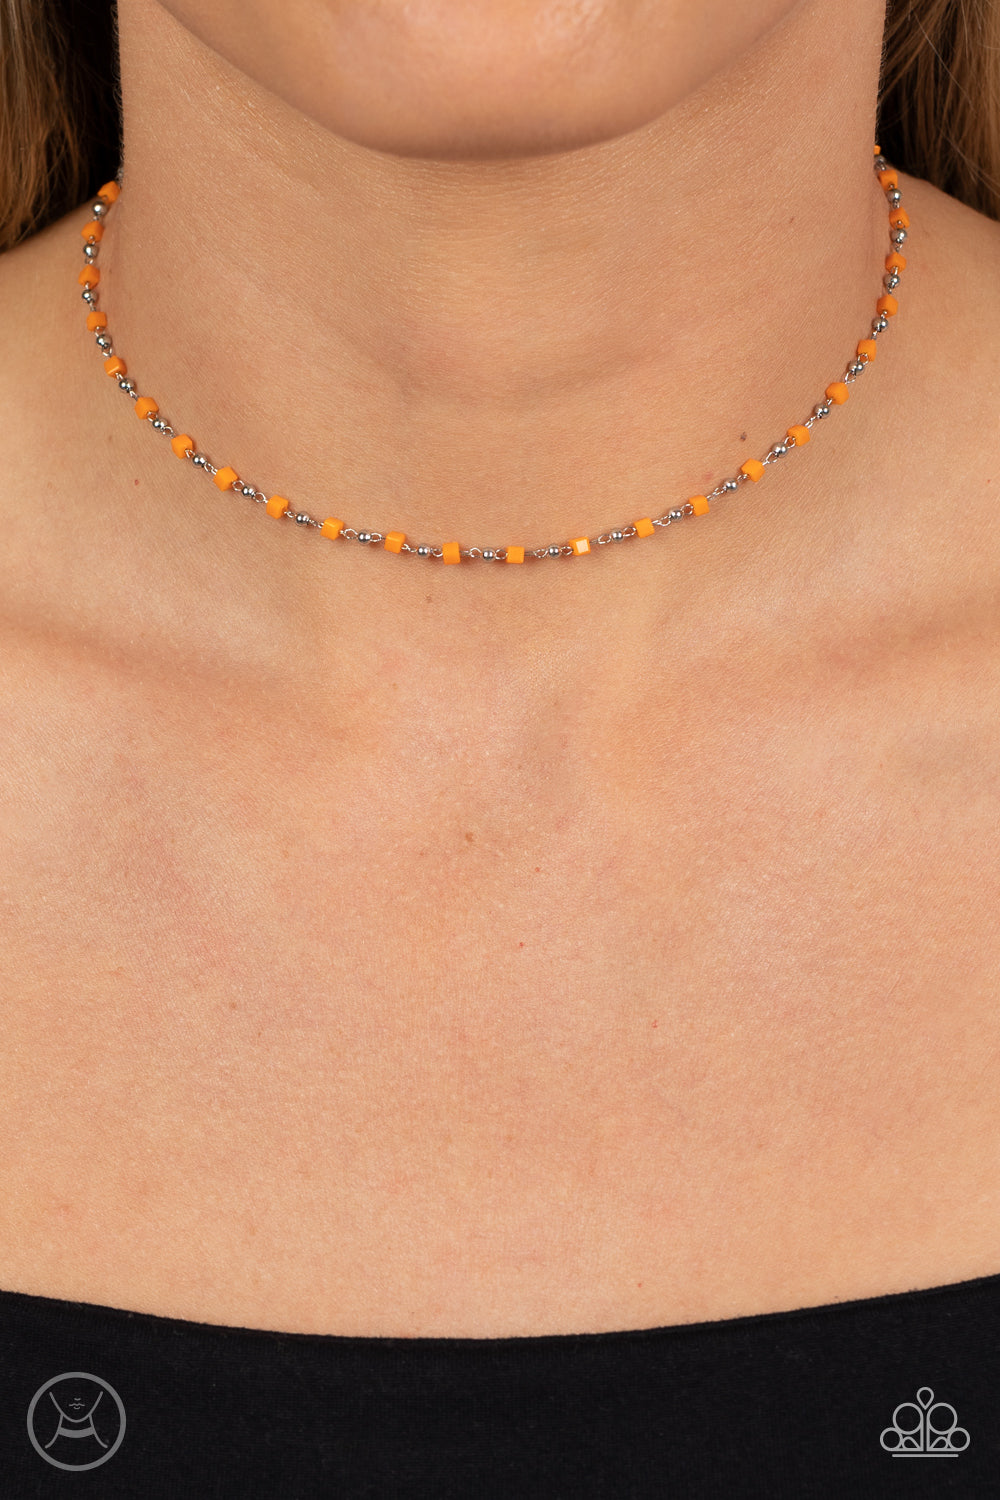 Neon Lights - Orange Square Beads/Dainty Silver Beaded Paparazzi Choker Necklace & matching earrings